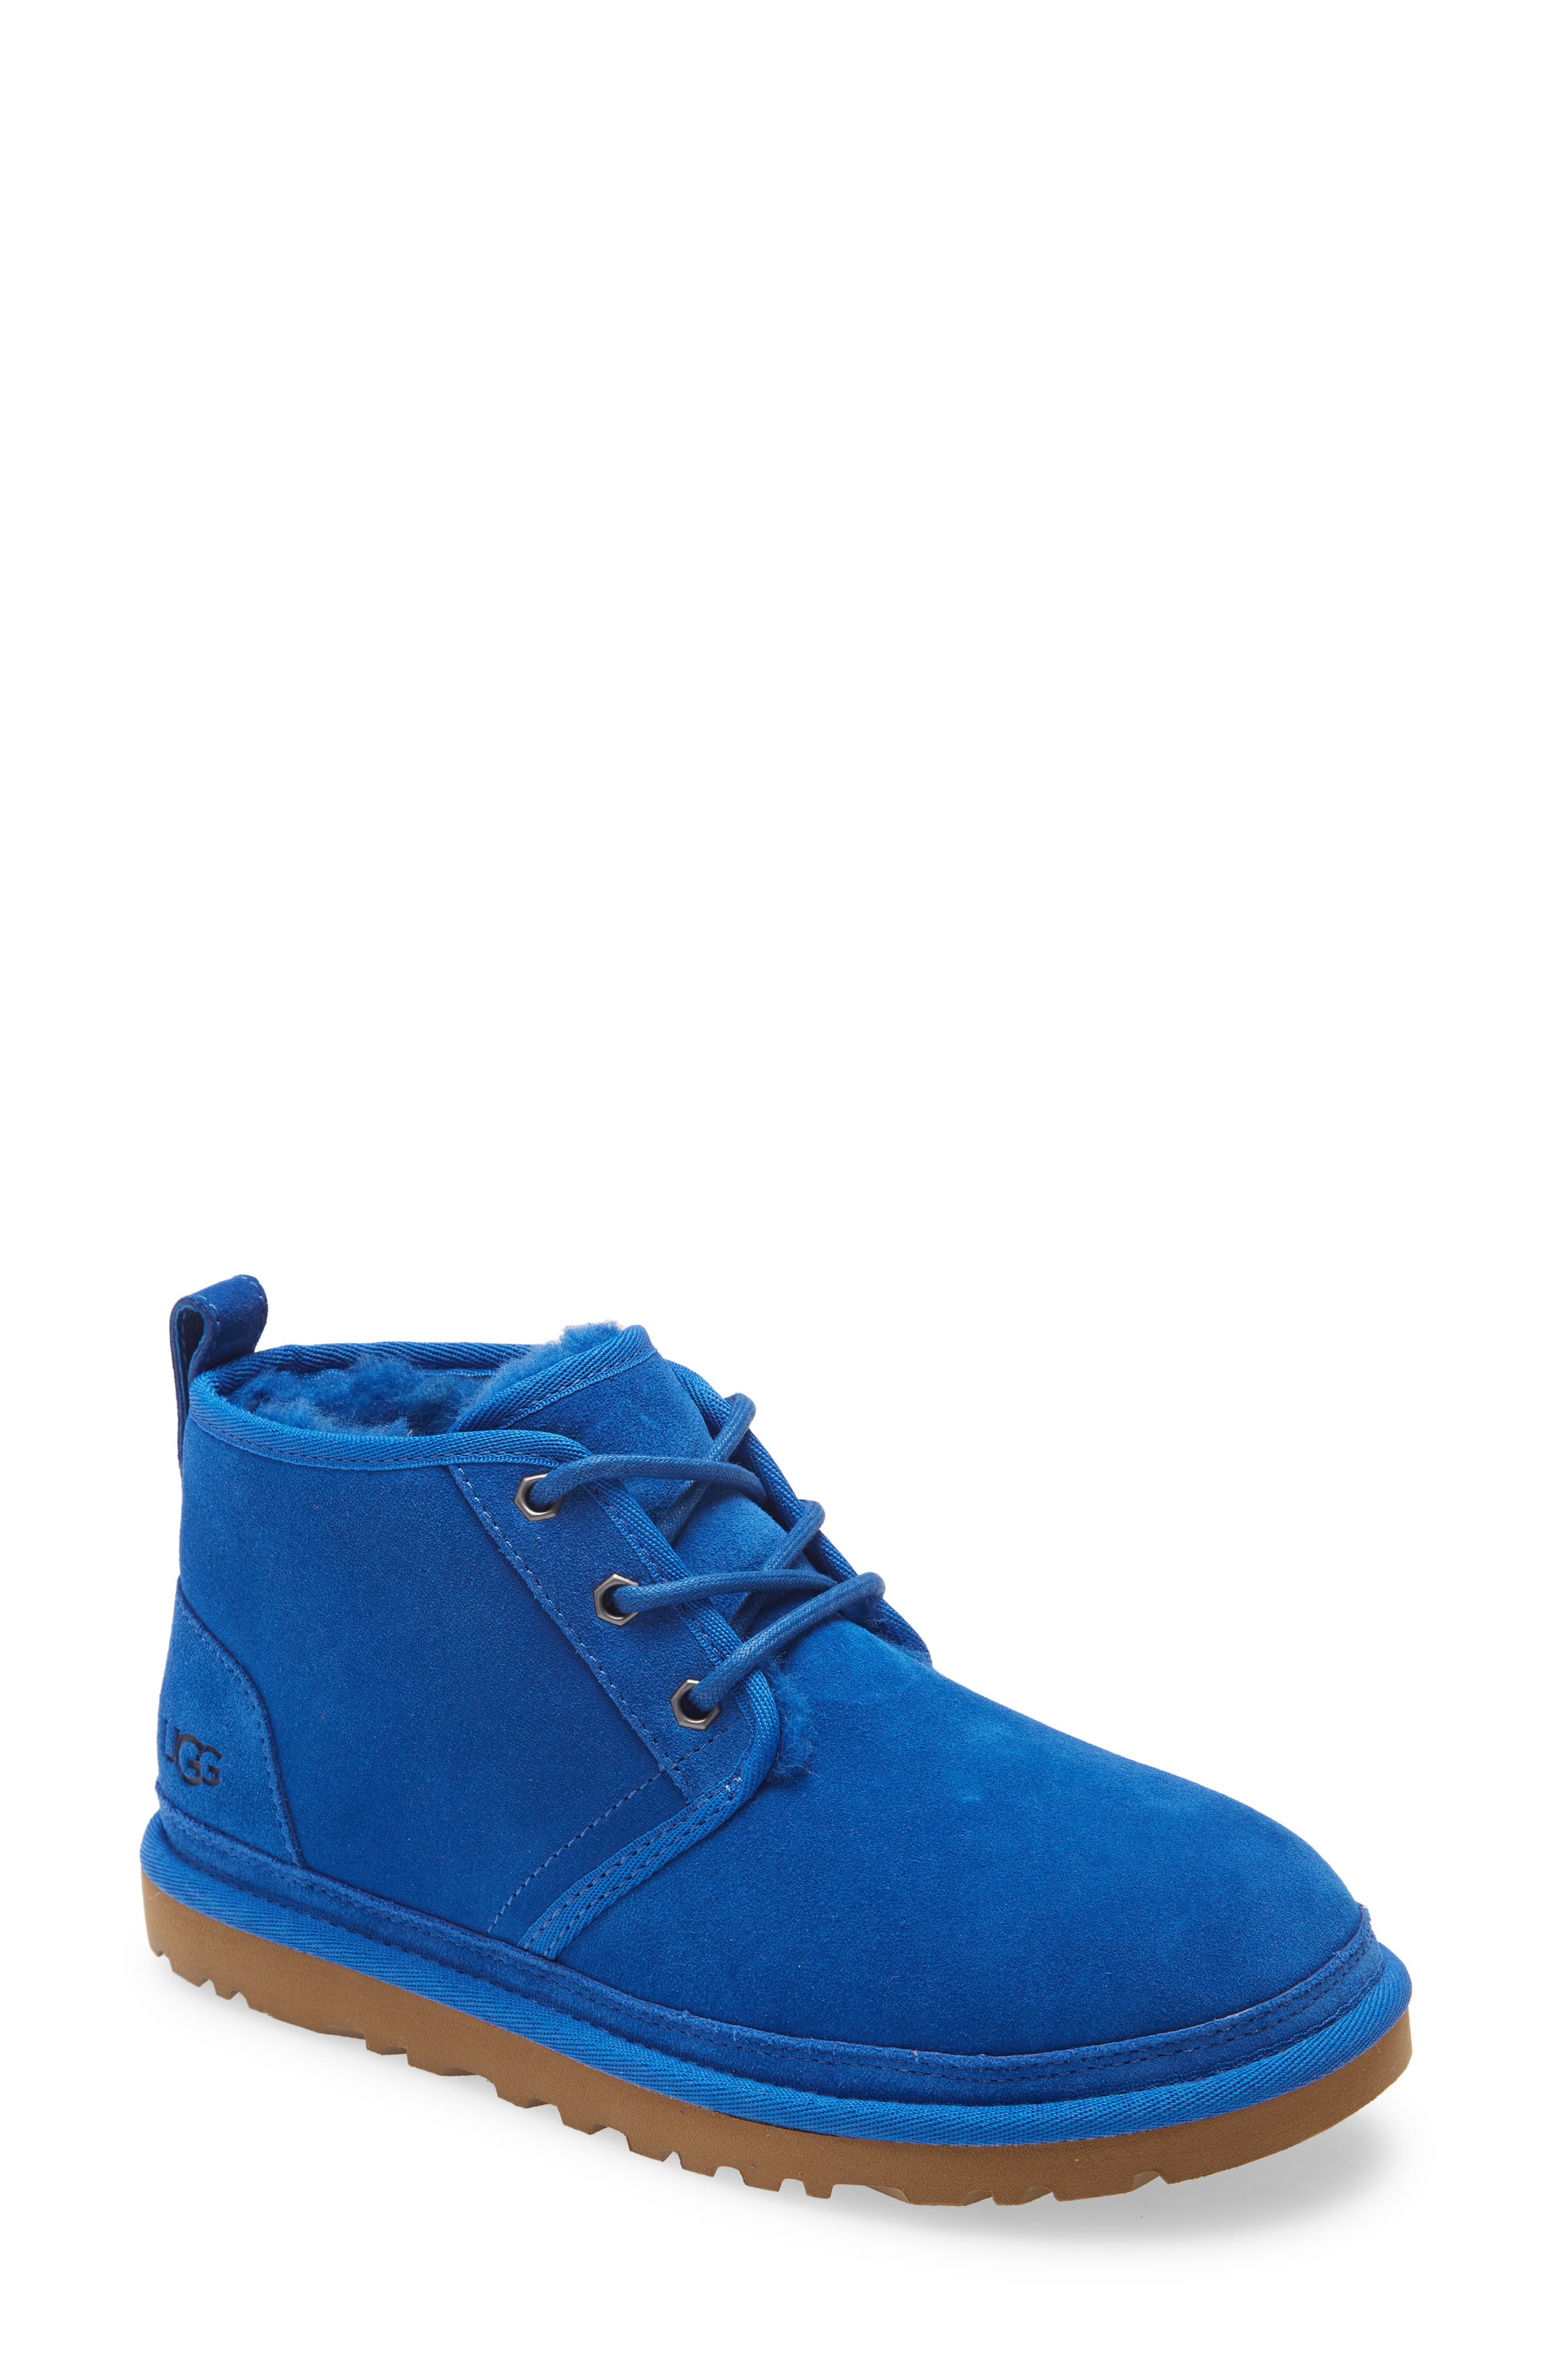 blue uggs for women